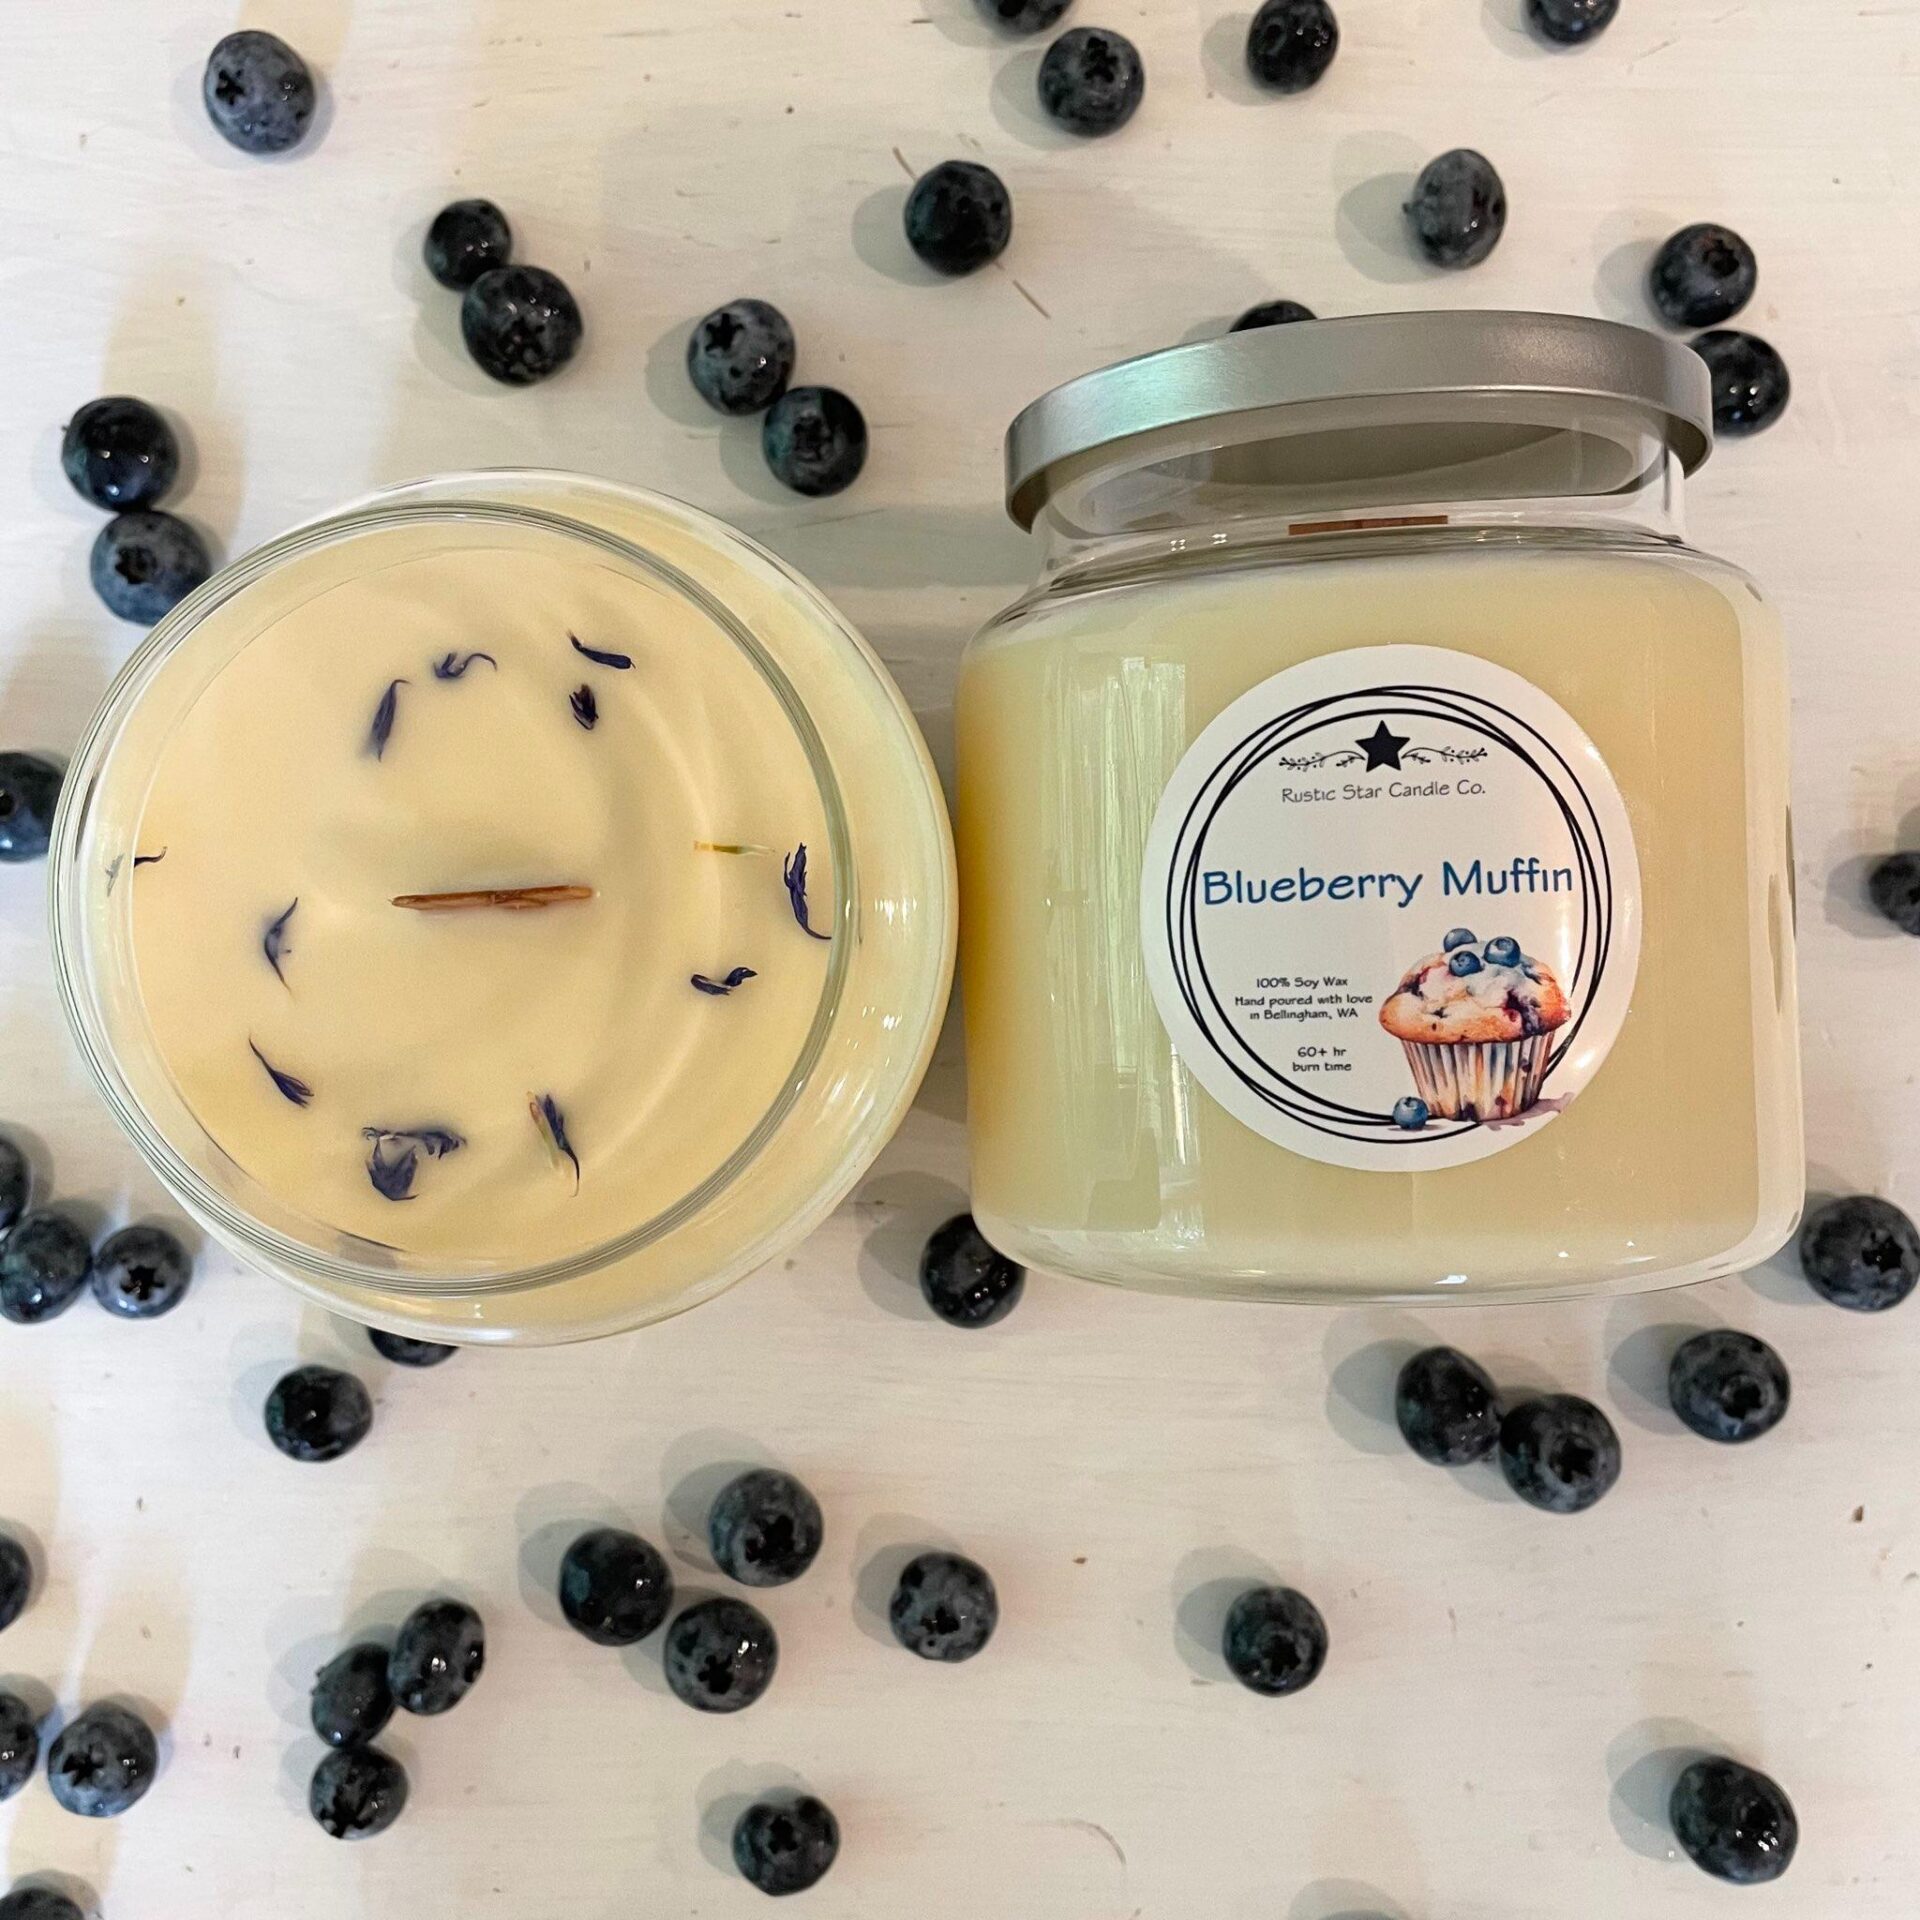 Blueberry Muffin Soy Candles